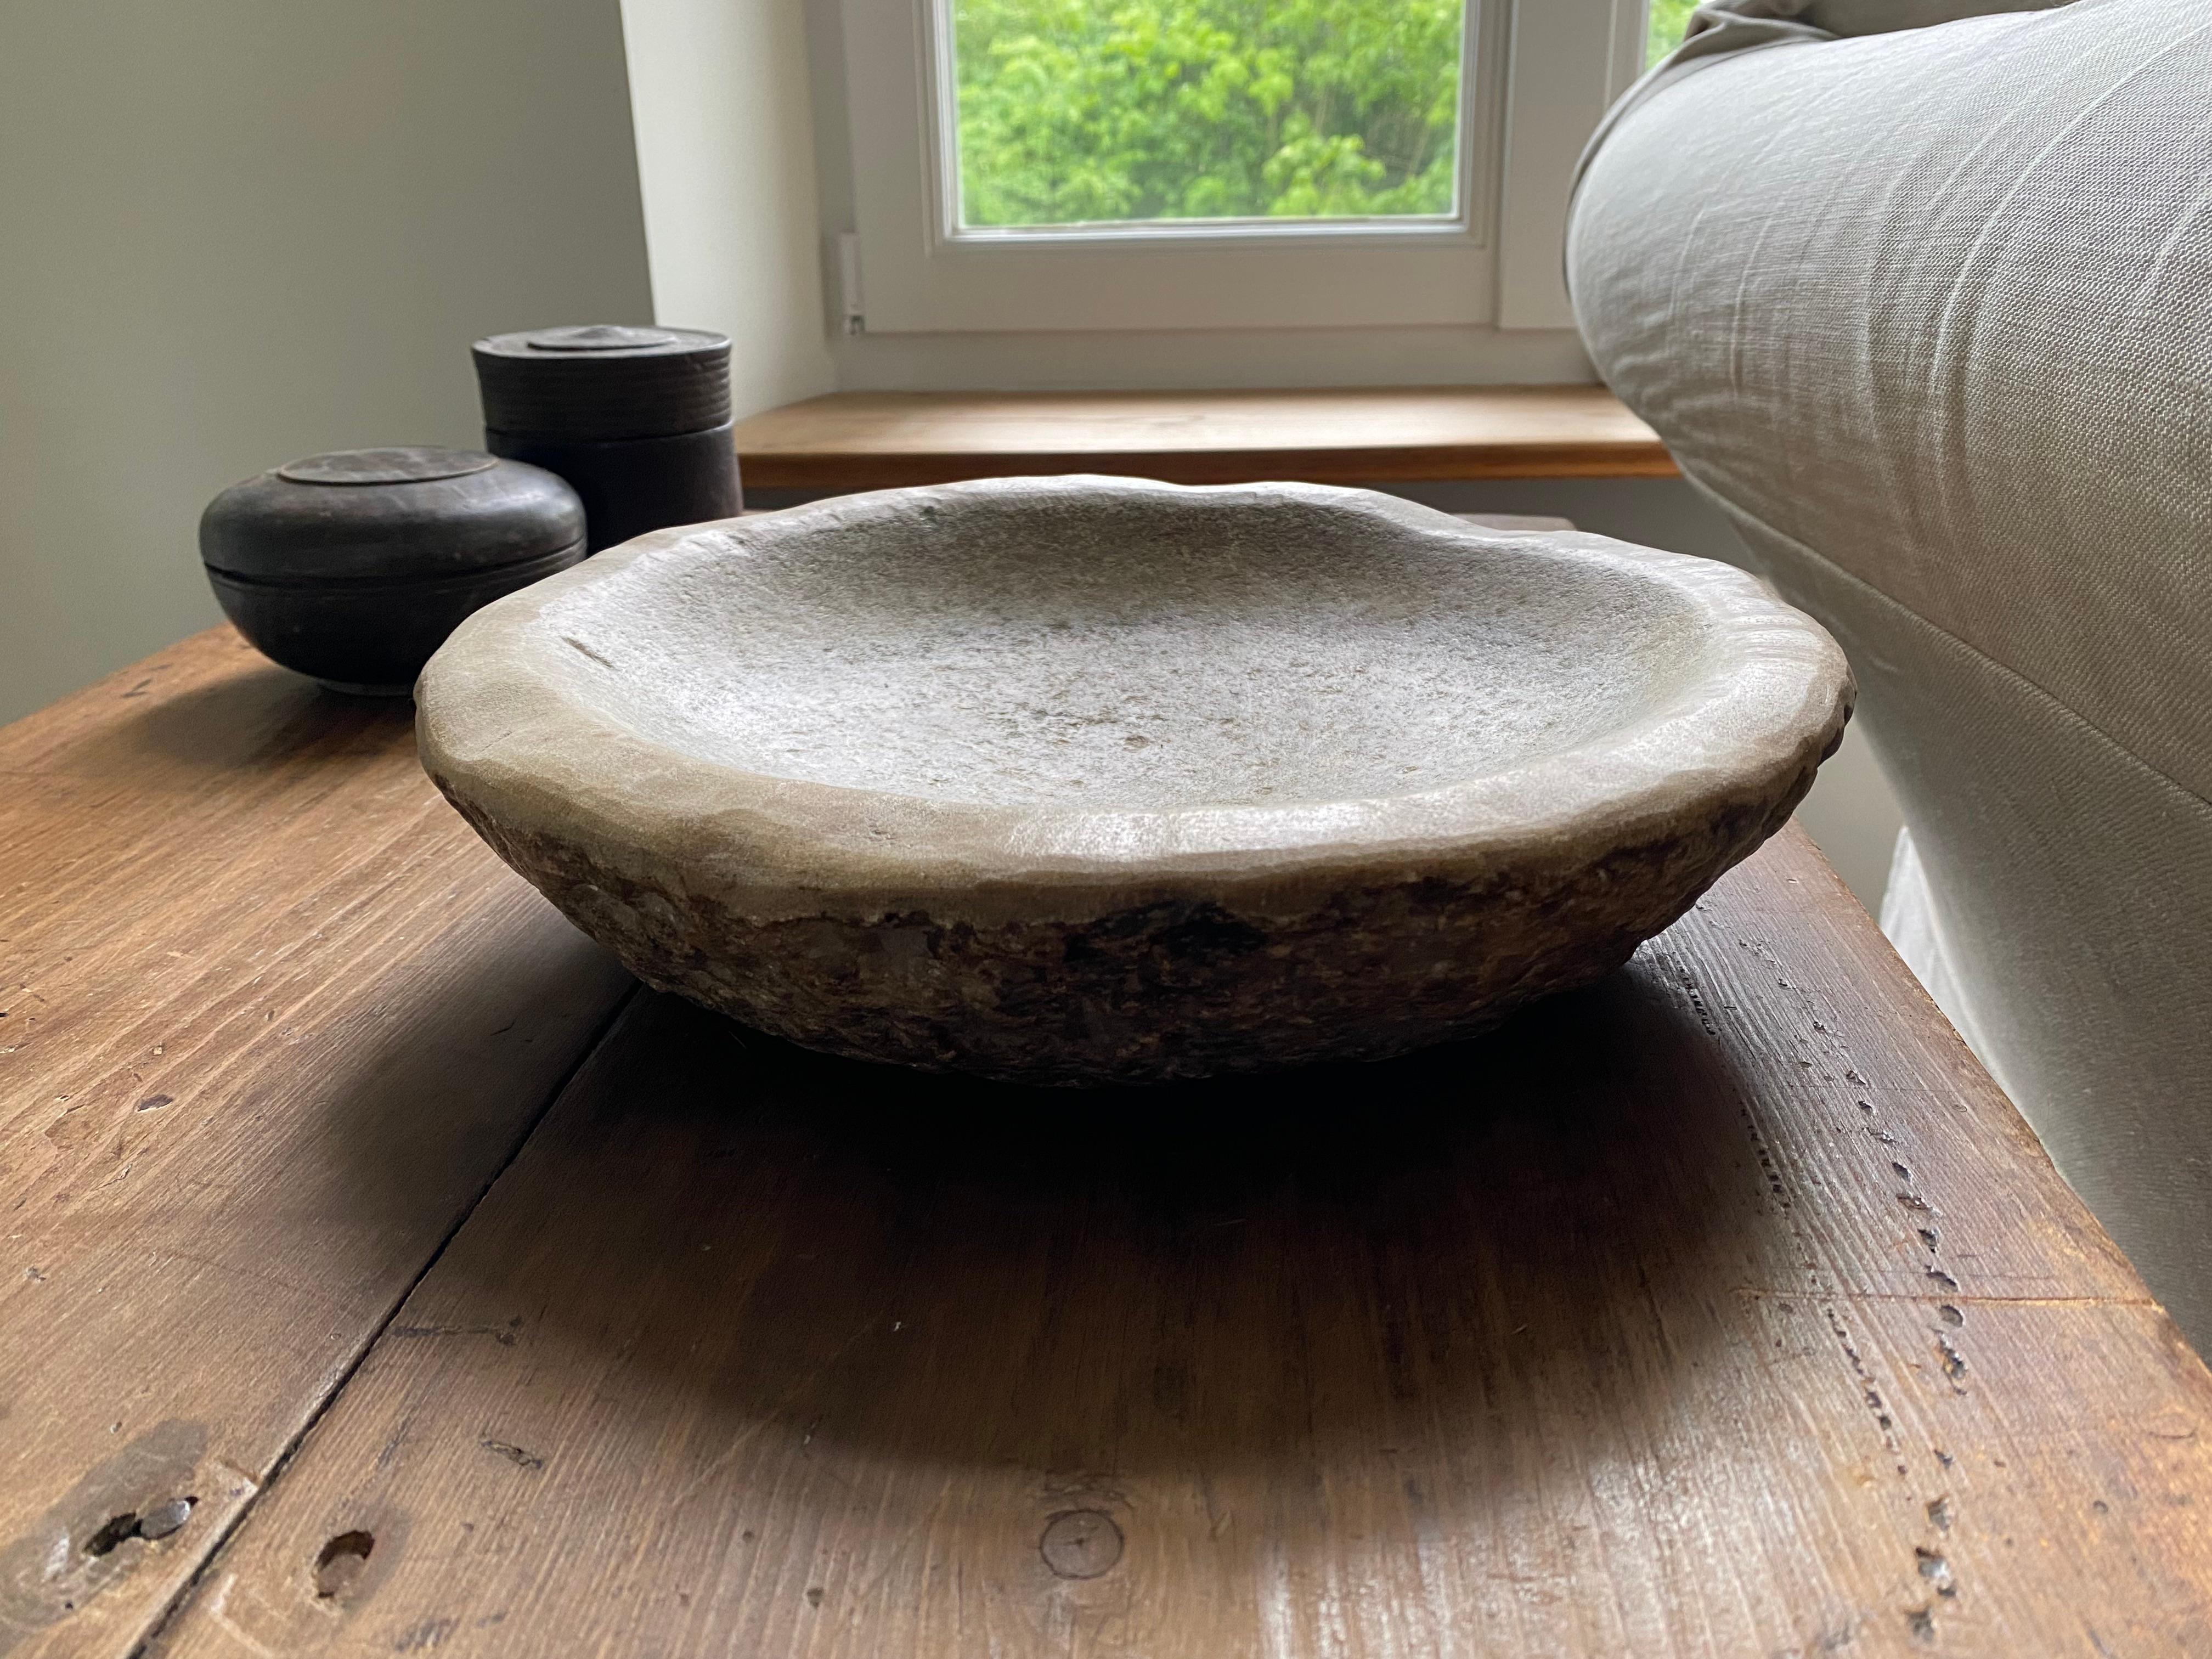 This beautiful Nepalese marble utility platter has acquired an enormous patina over the years.
Large size and such a striking piece on your kitchen counter or table.

We ship safely worldwide.